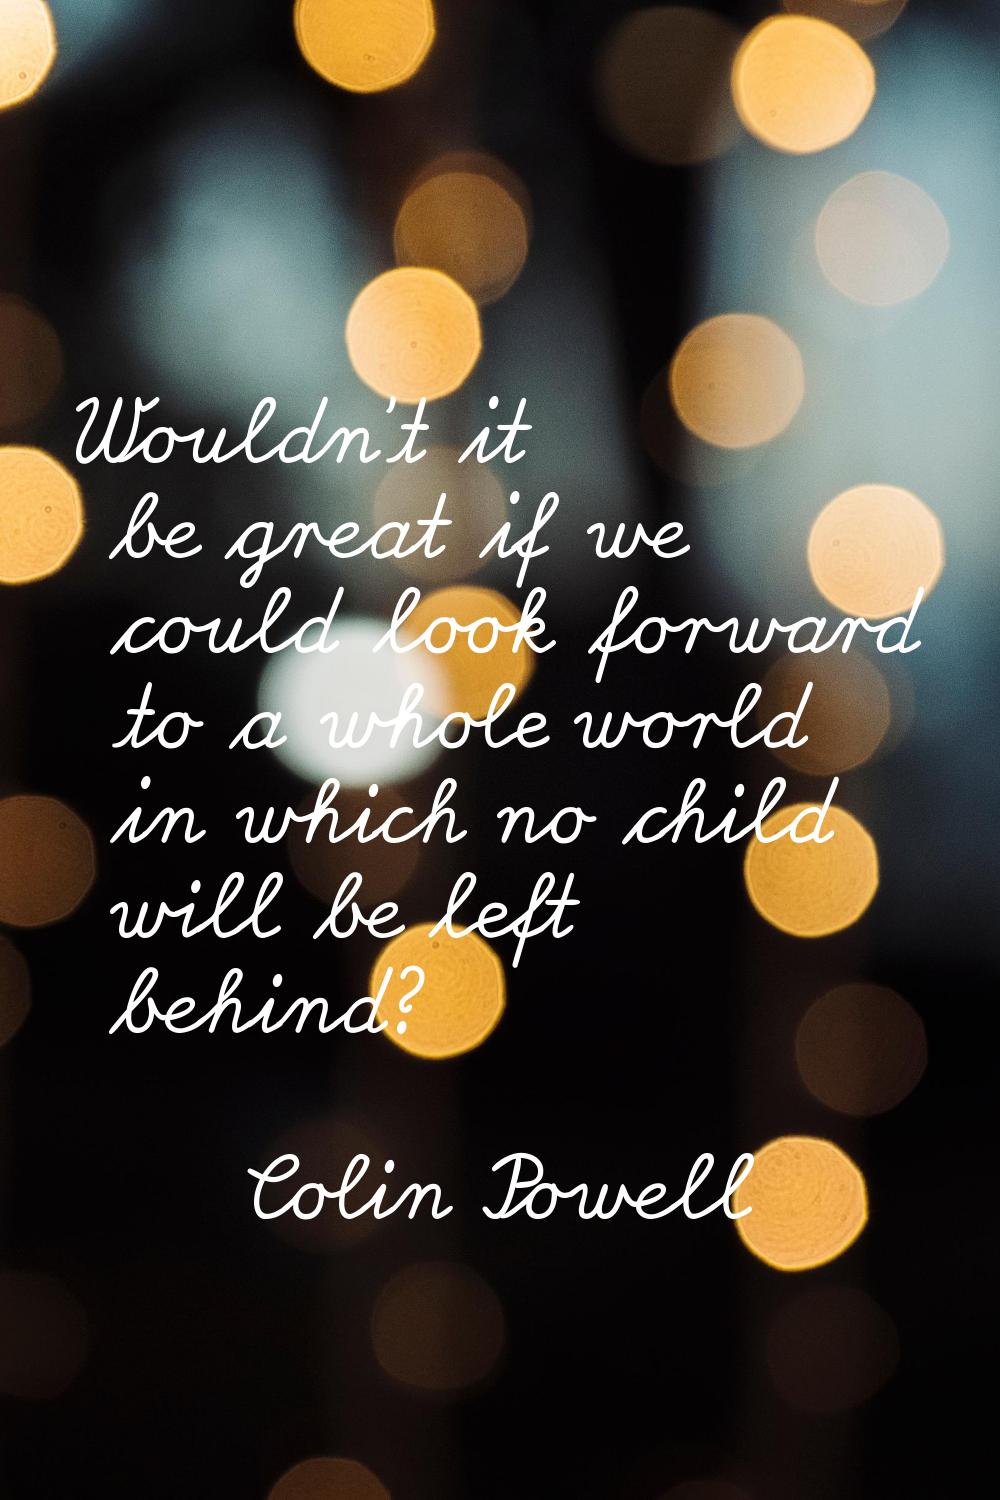 Wouldn't it be great if we could look forward to a whole world in which no child will be left behin